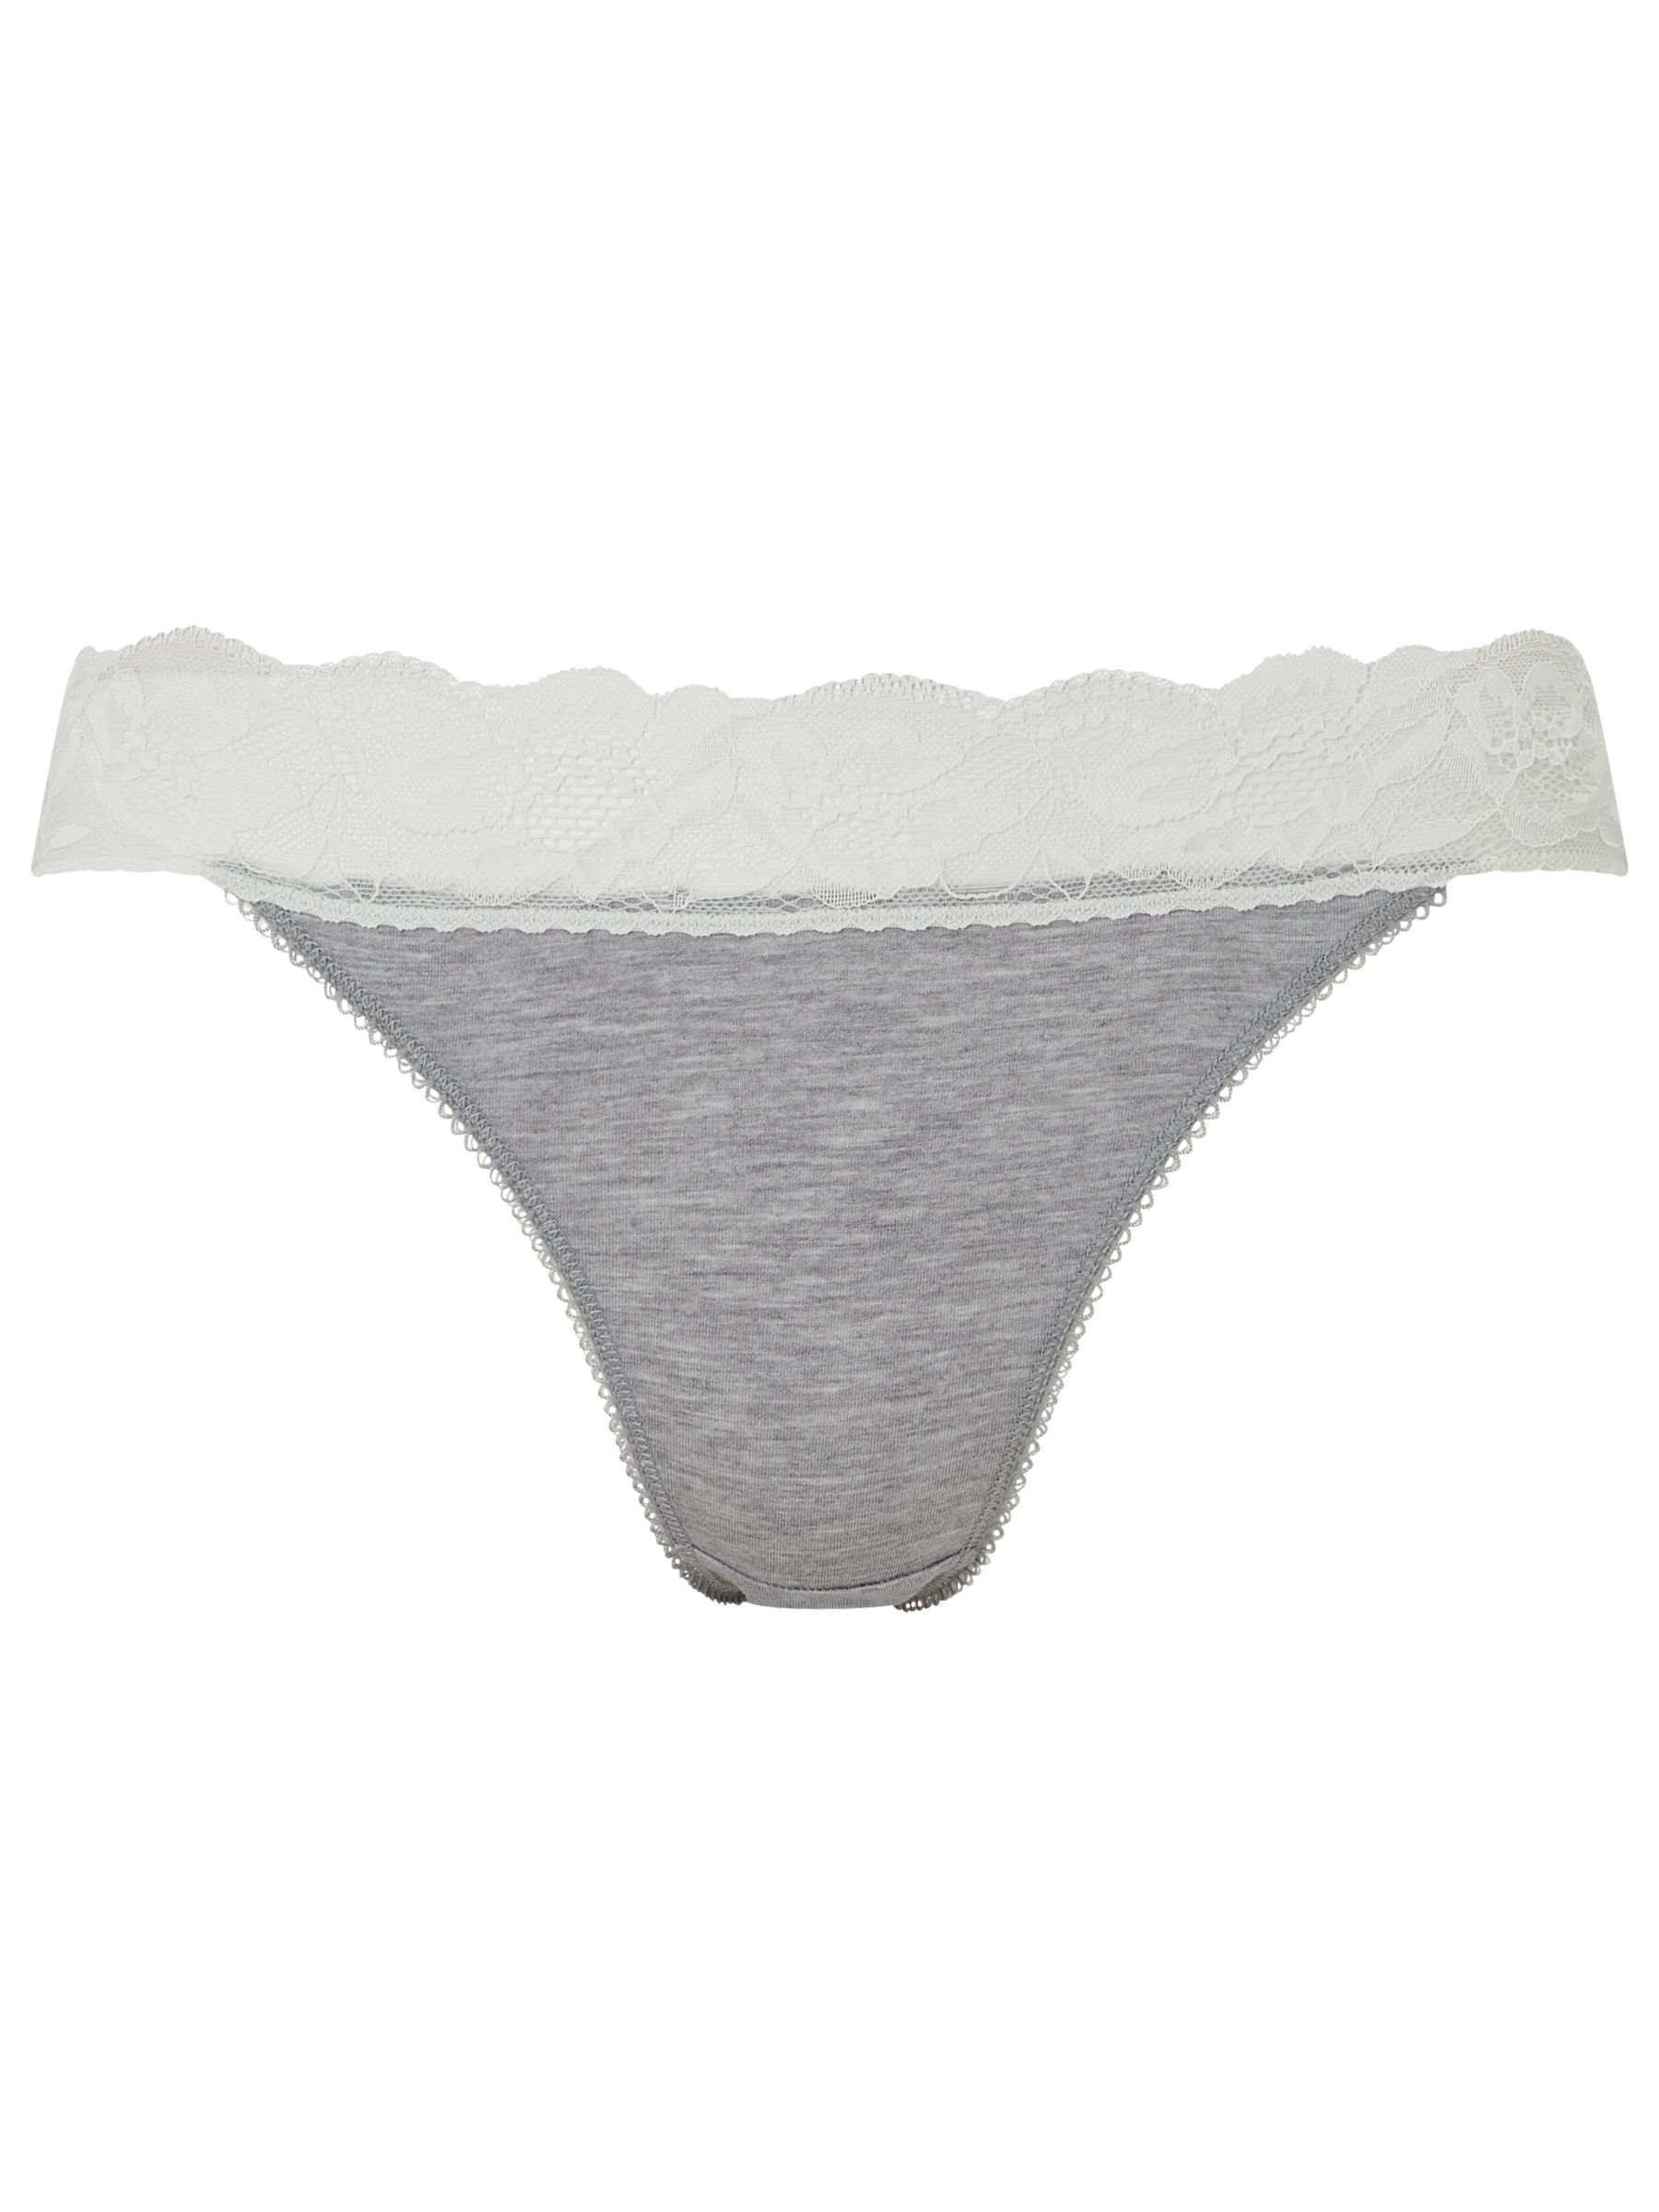 John Lewis ANYDAY Lace Trim Tanga Knickers, Pack of 3, Grey Marl/Cream at John  Lewis & Partners